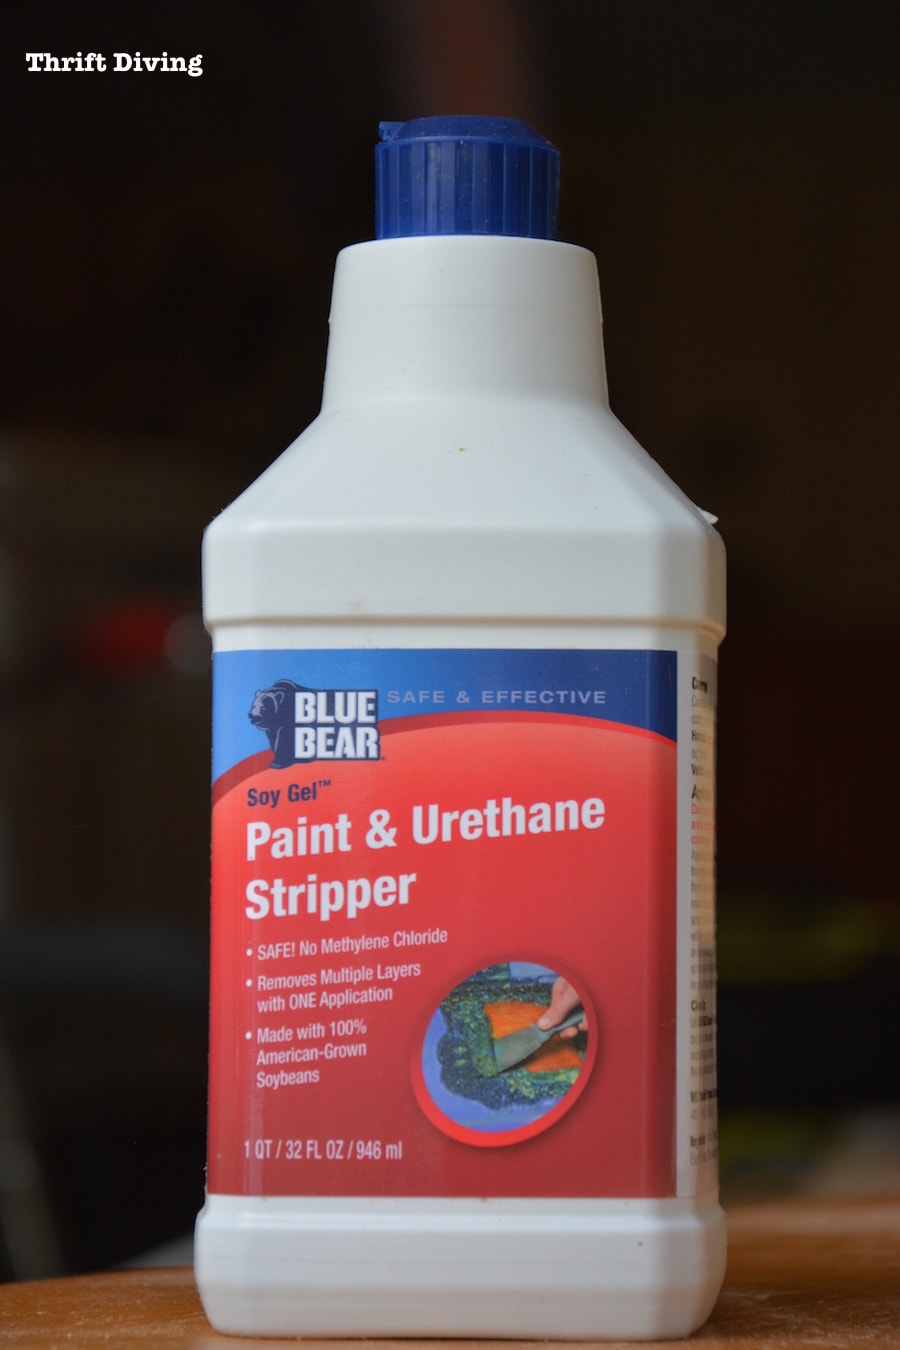 Blue Bear Paint Stripper soy based stripper non toxic Review - ThriftDiving.com